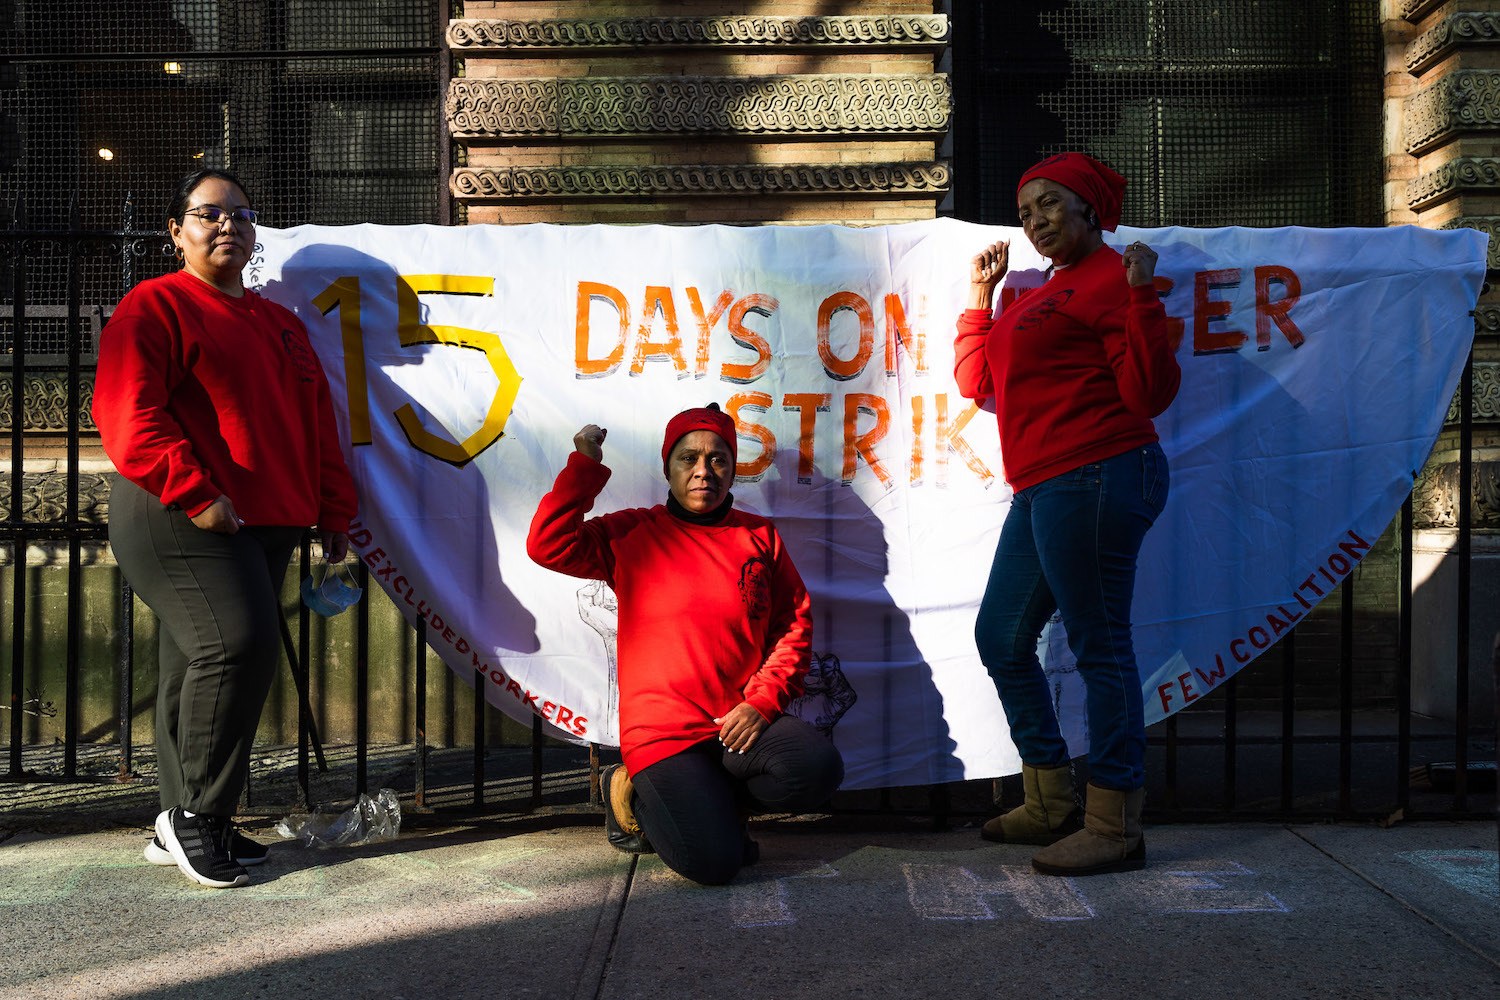 From left: Veronica Leal, Maria Isabel Sierra Mosso and Santa Arias pose in front of a sign on Thompson Street in Manhattan during a hunger strike for excluded workers. March 2021